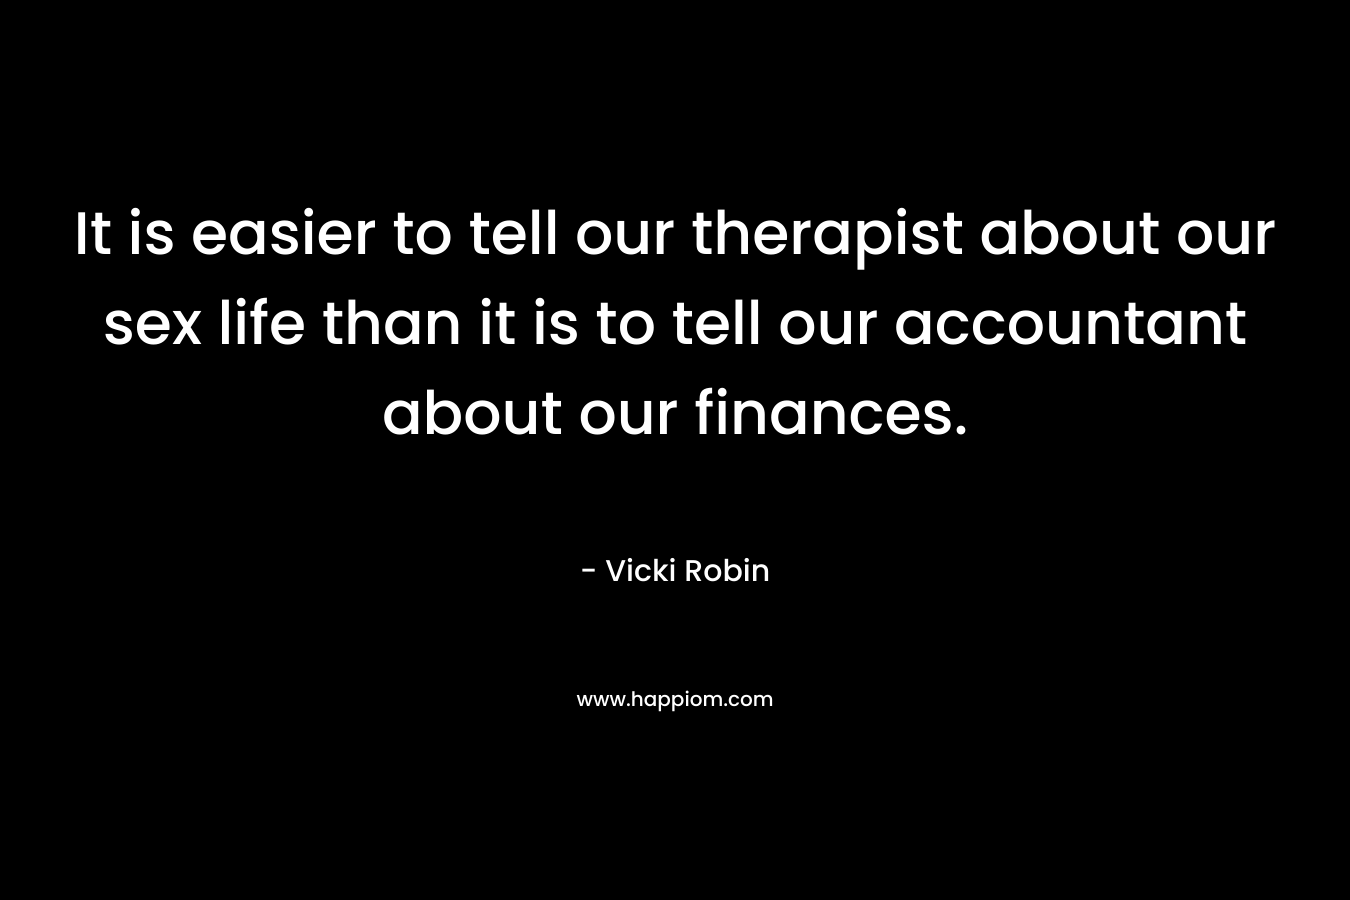 It is easier to tell our therapist about our sex life than it is to tell our accountant about our finances. – Vicki Robin